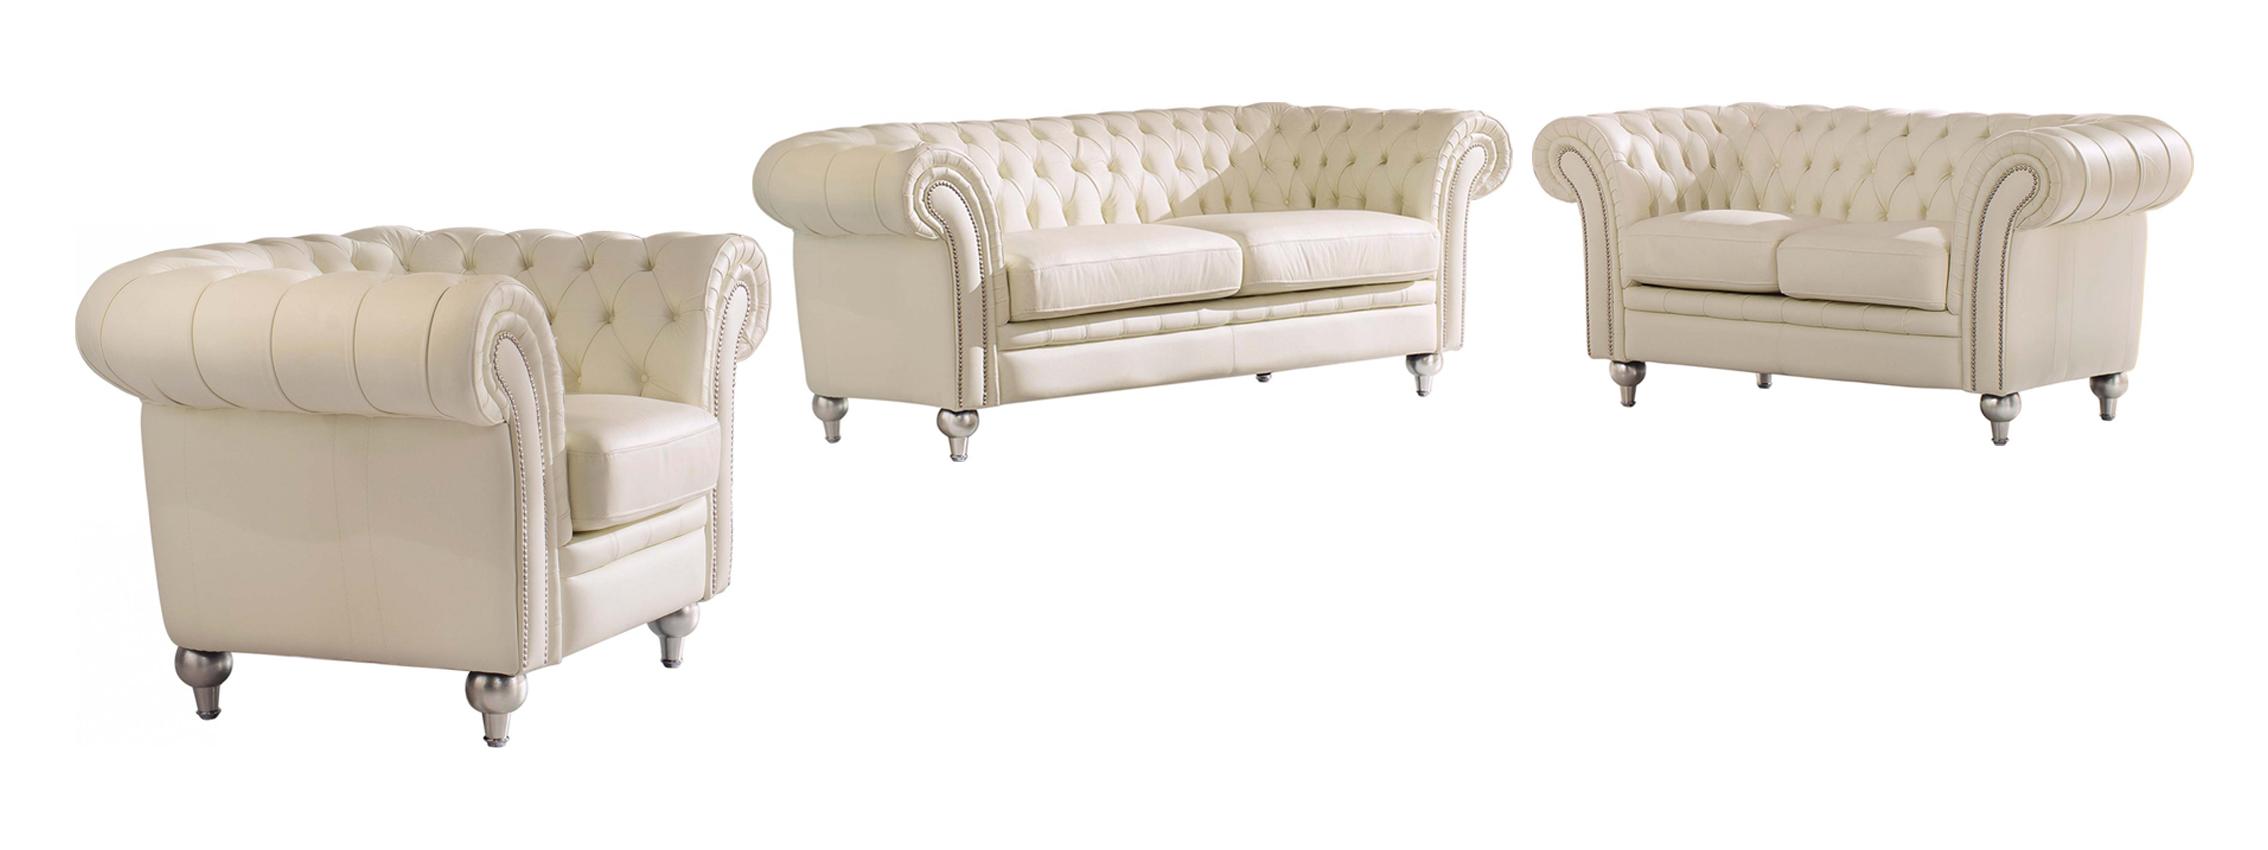 Contemporary Sofa Loveseat and Chair Set LH2044-IV-S/L/C LH2044-IV-Sofa Set-3 in Ivory Genuine Leather